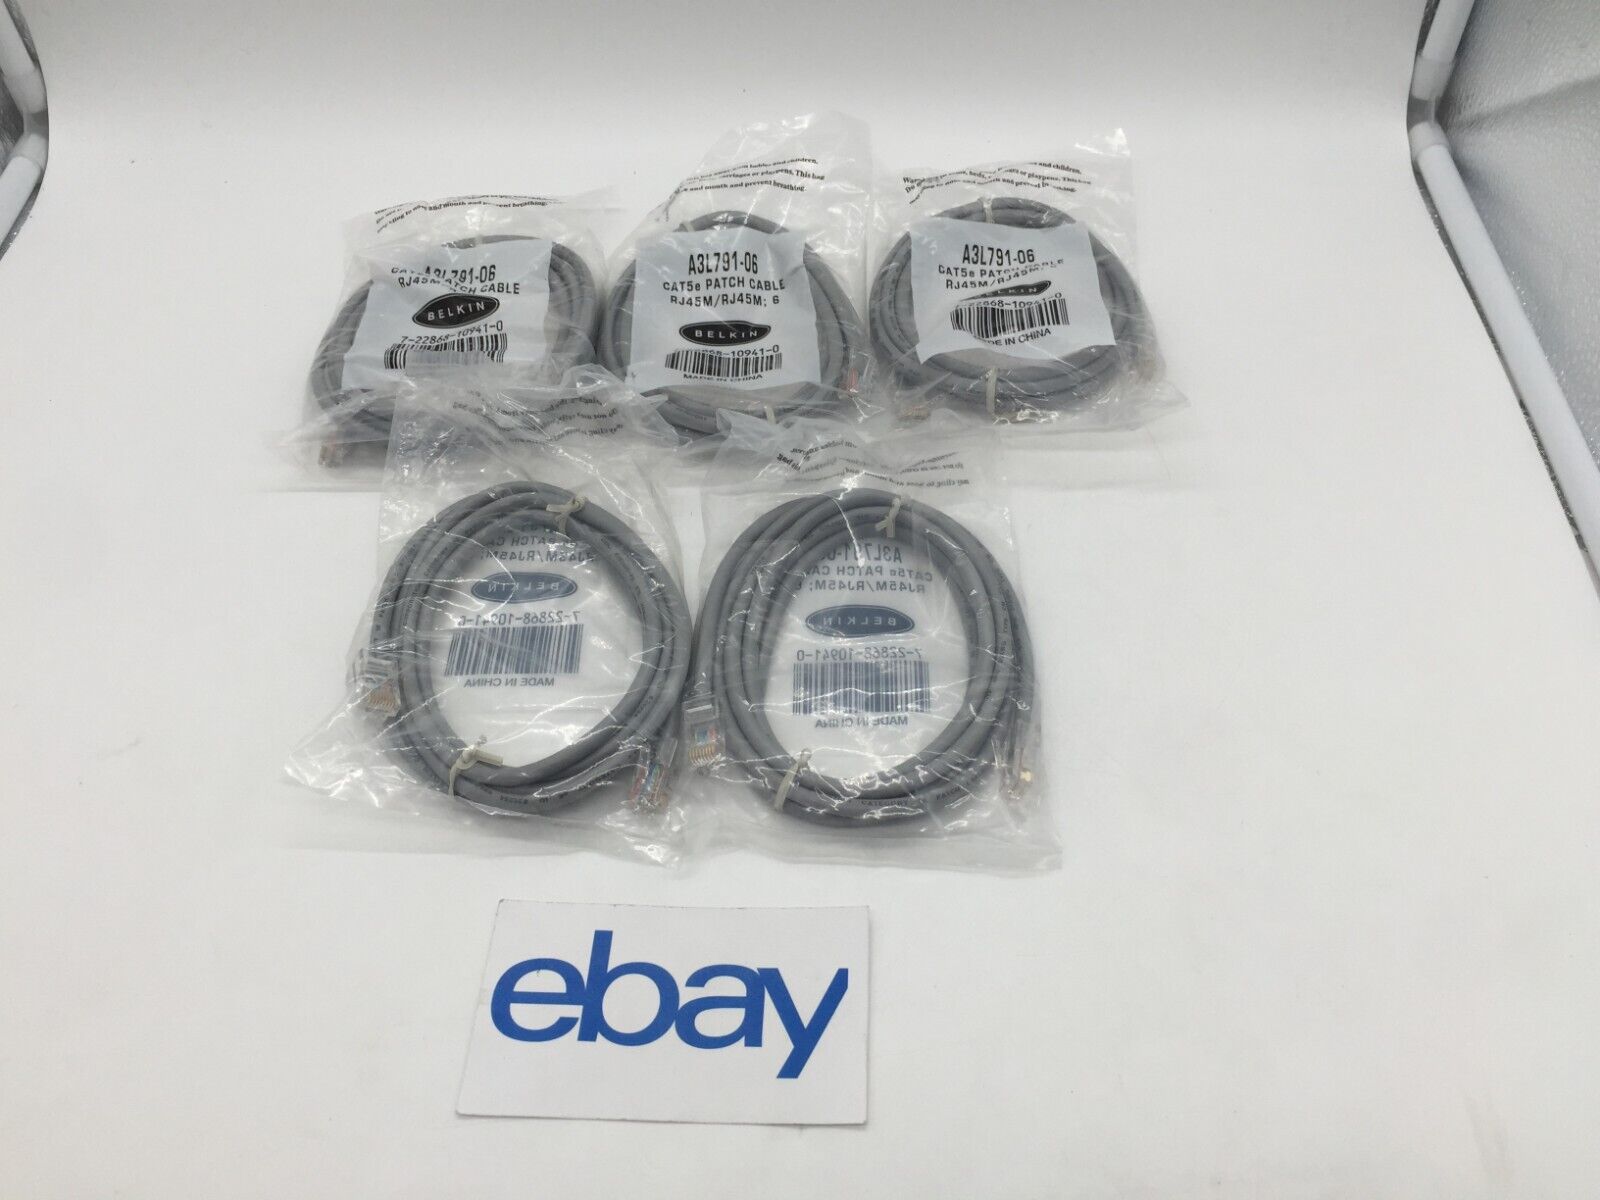 NEW LOT OF 5 Belkin 6' Cat 5e Ethernet RJ45 Network Patch Cable FREE S/H